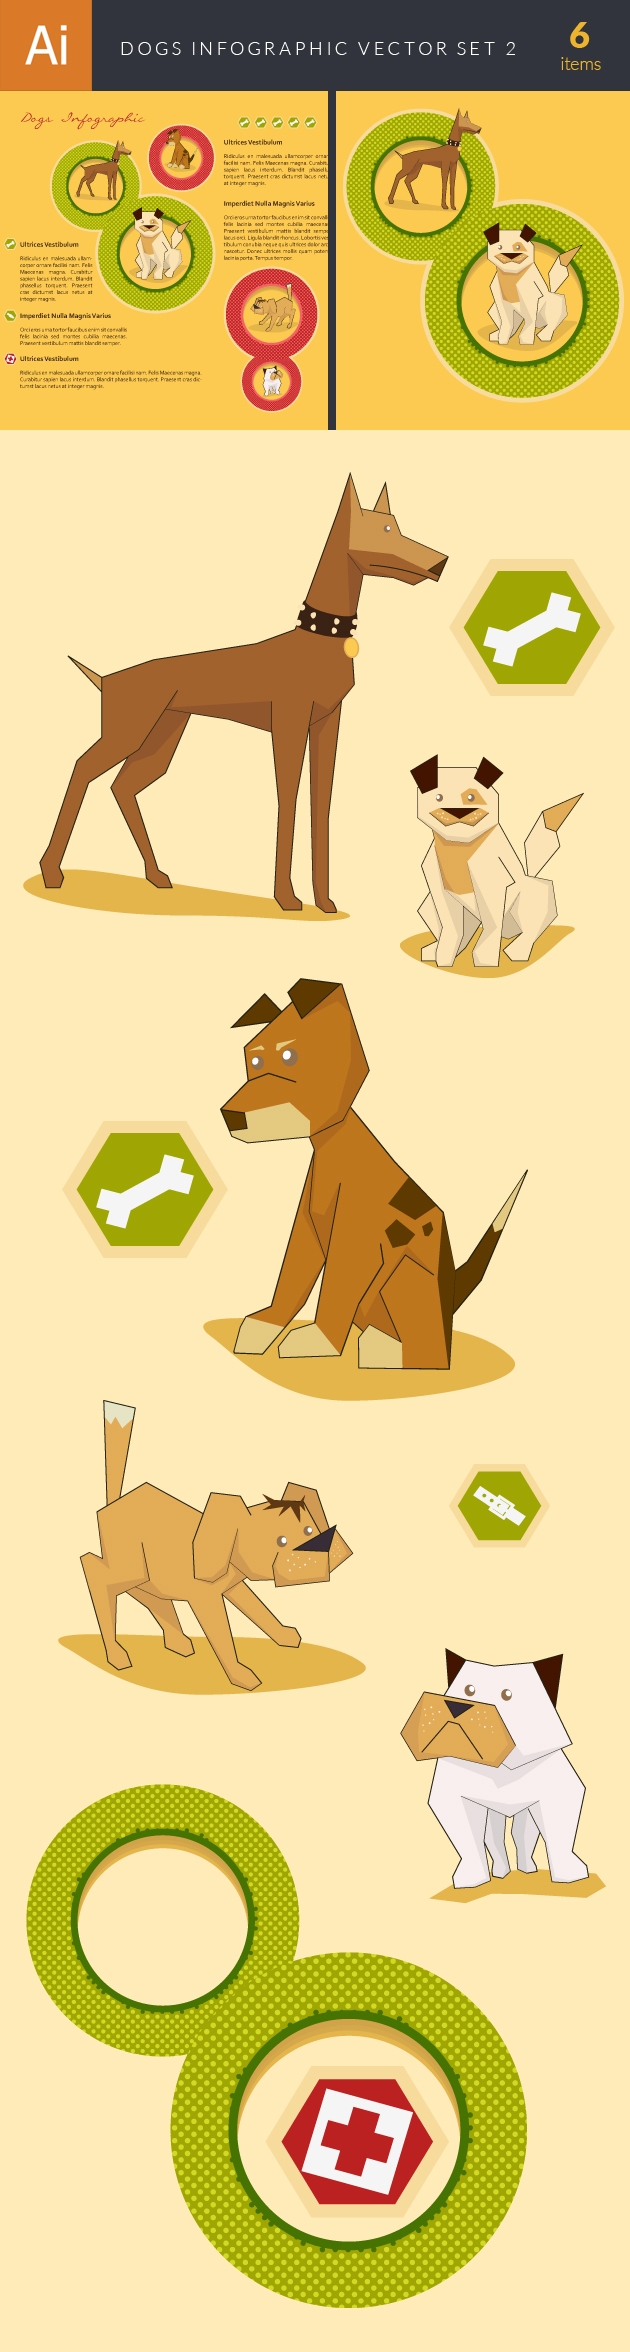 Dogs Infographic Set 2 2